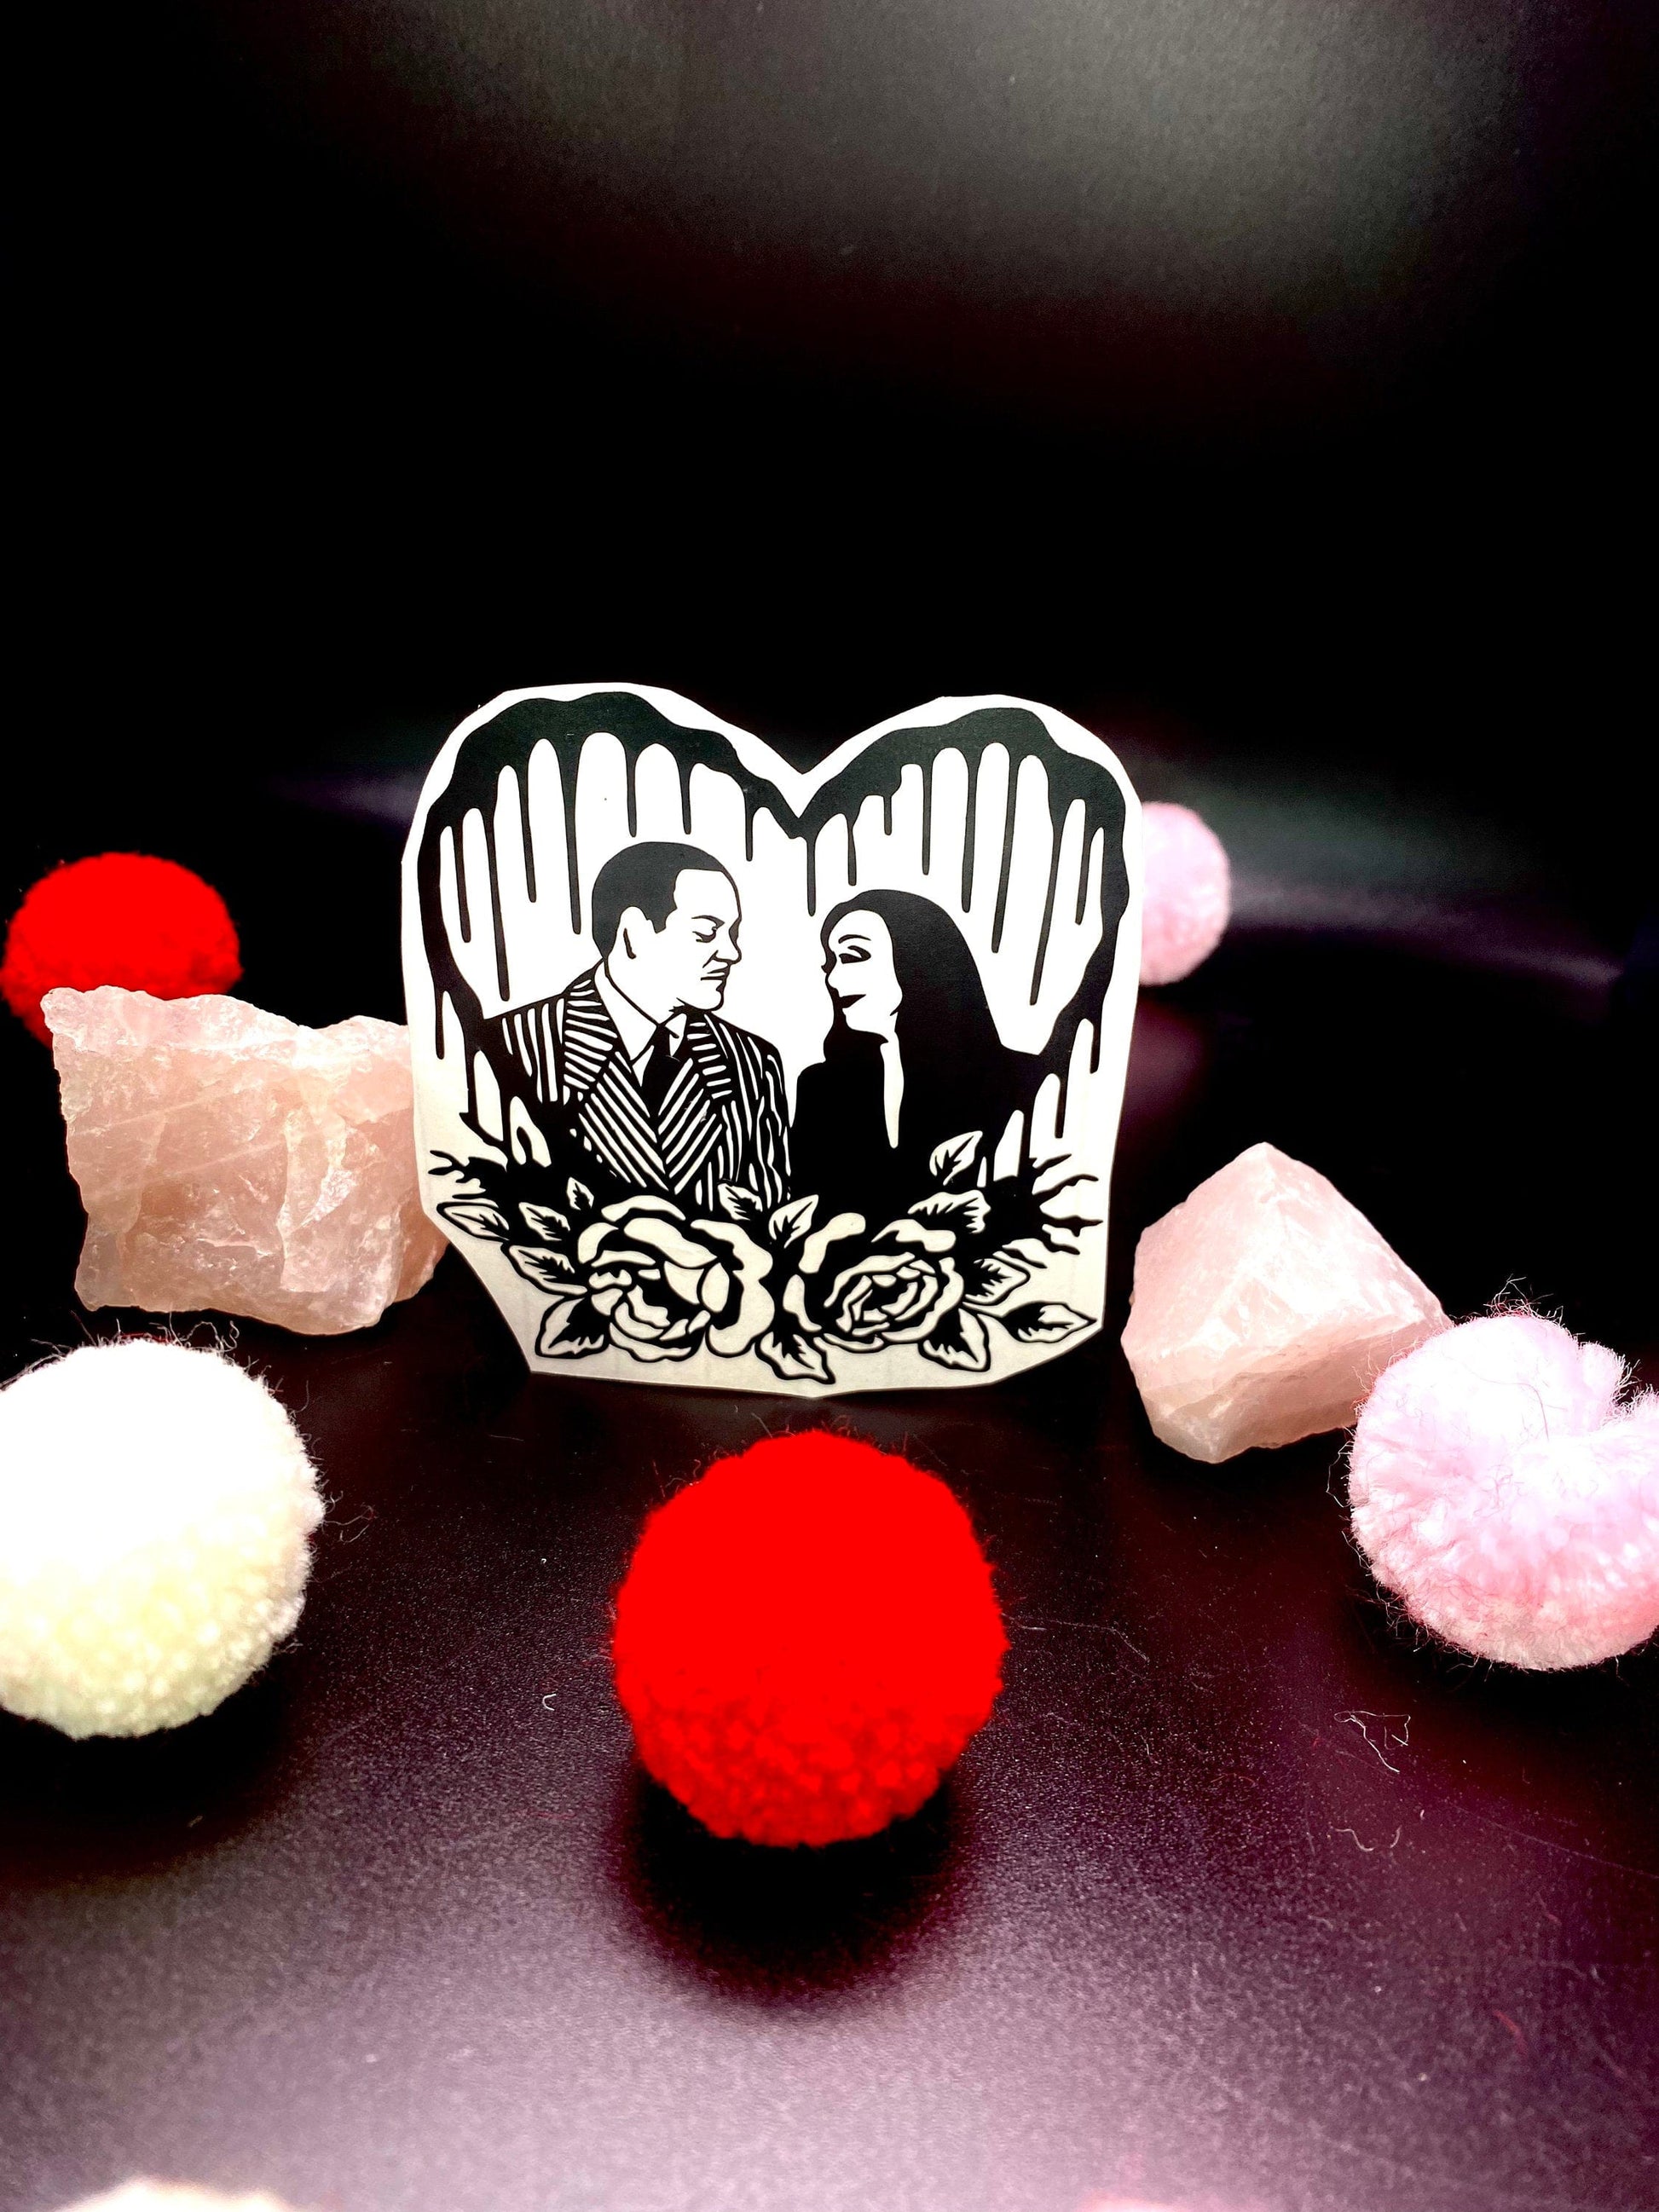 Shadow Witch Designs The Addams Family Morticia and Gomez Heart Valentine Vinyl Decal Horror Couple